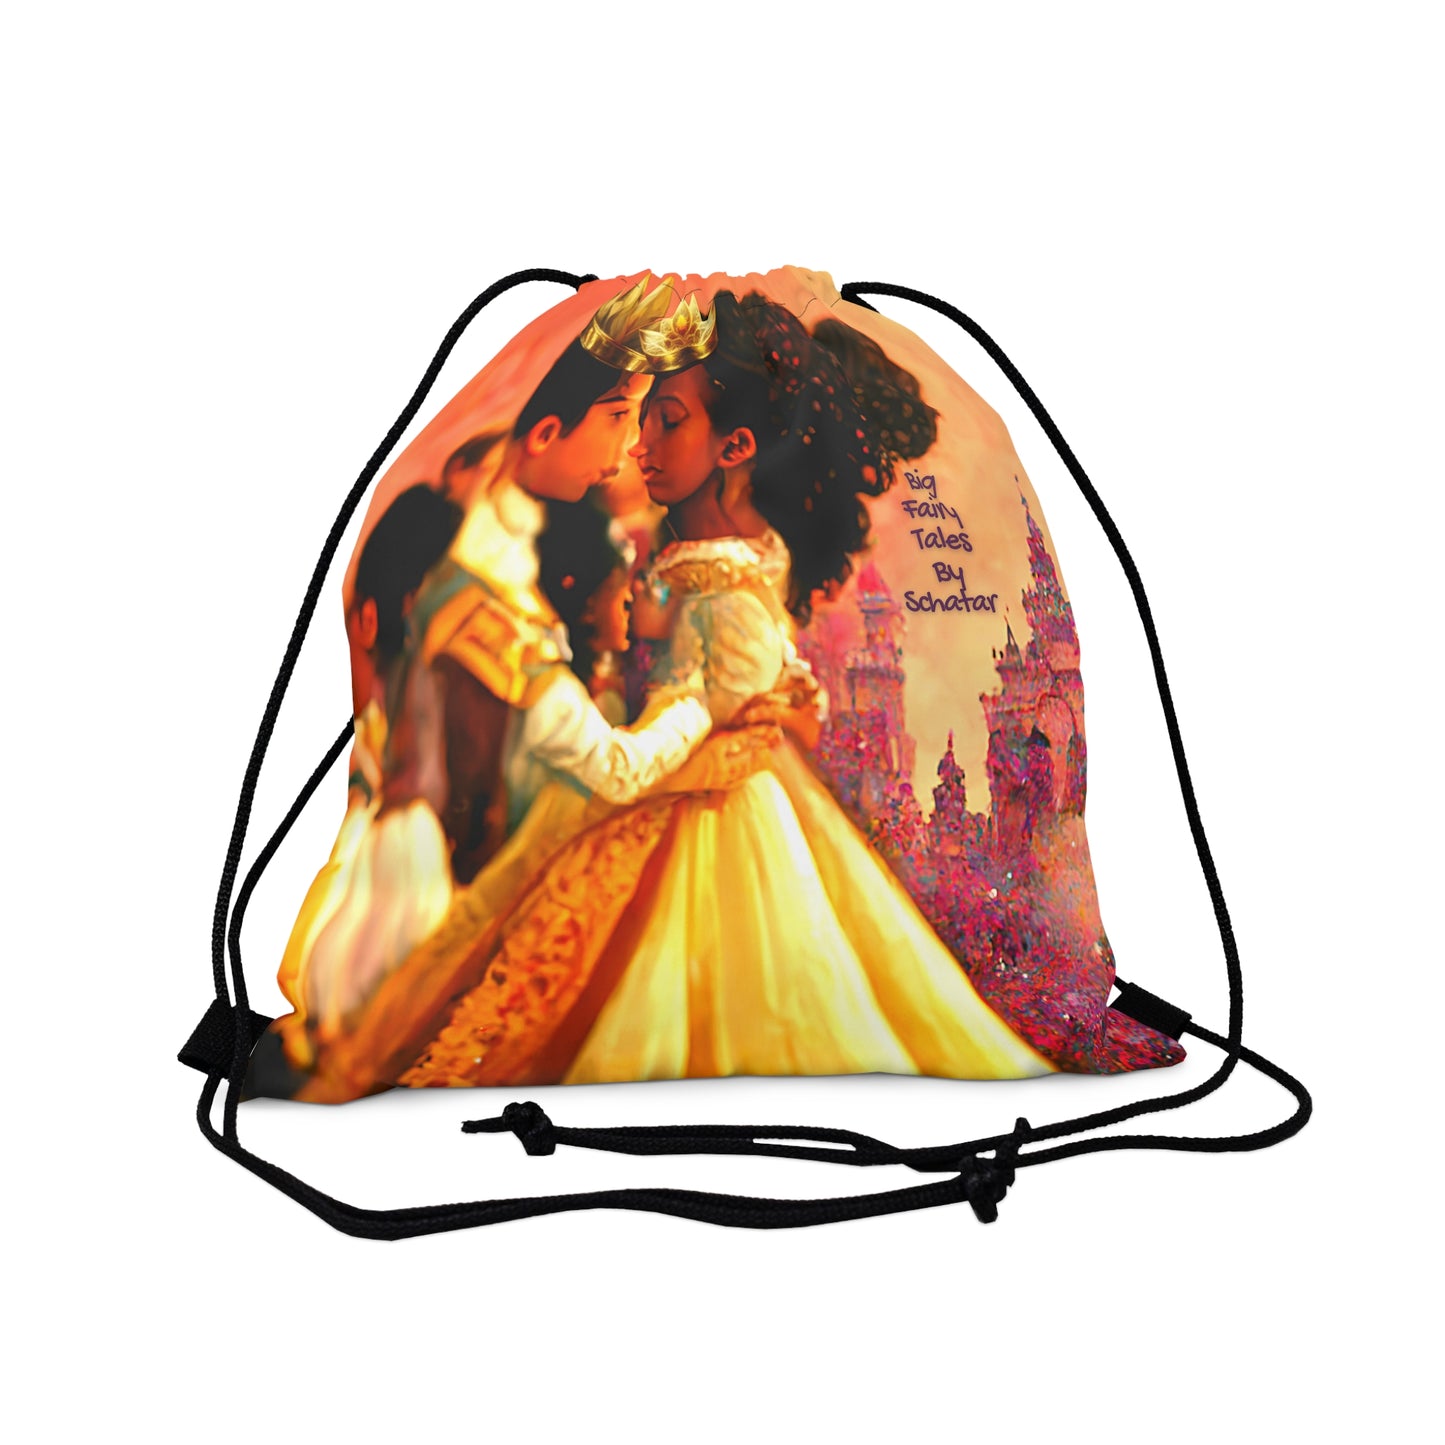 Big Fairy Tales By Schatar - Romeo and Juliette  Cinch Sack